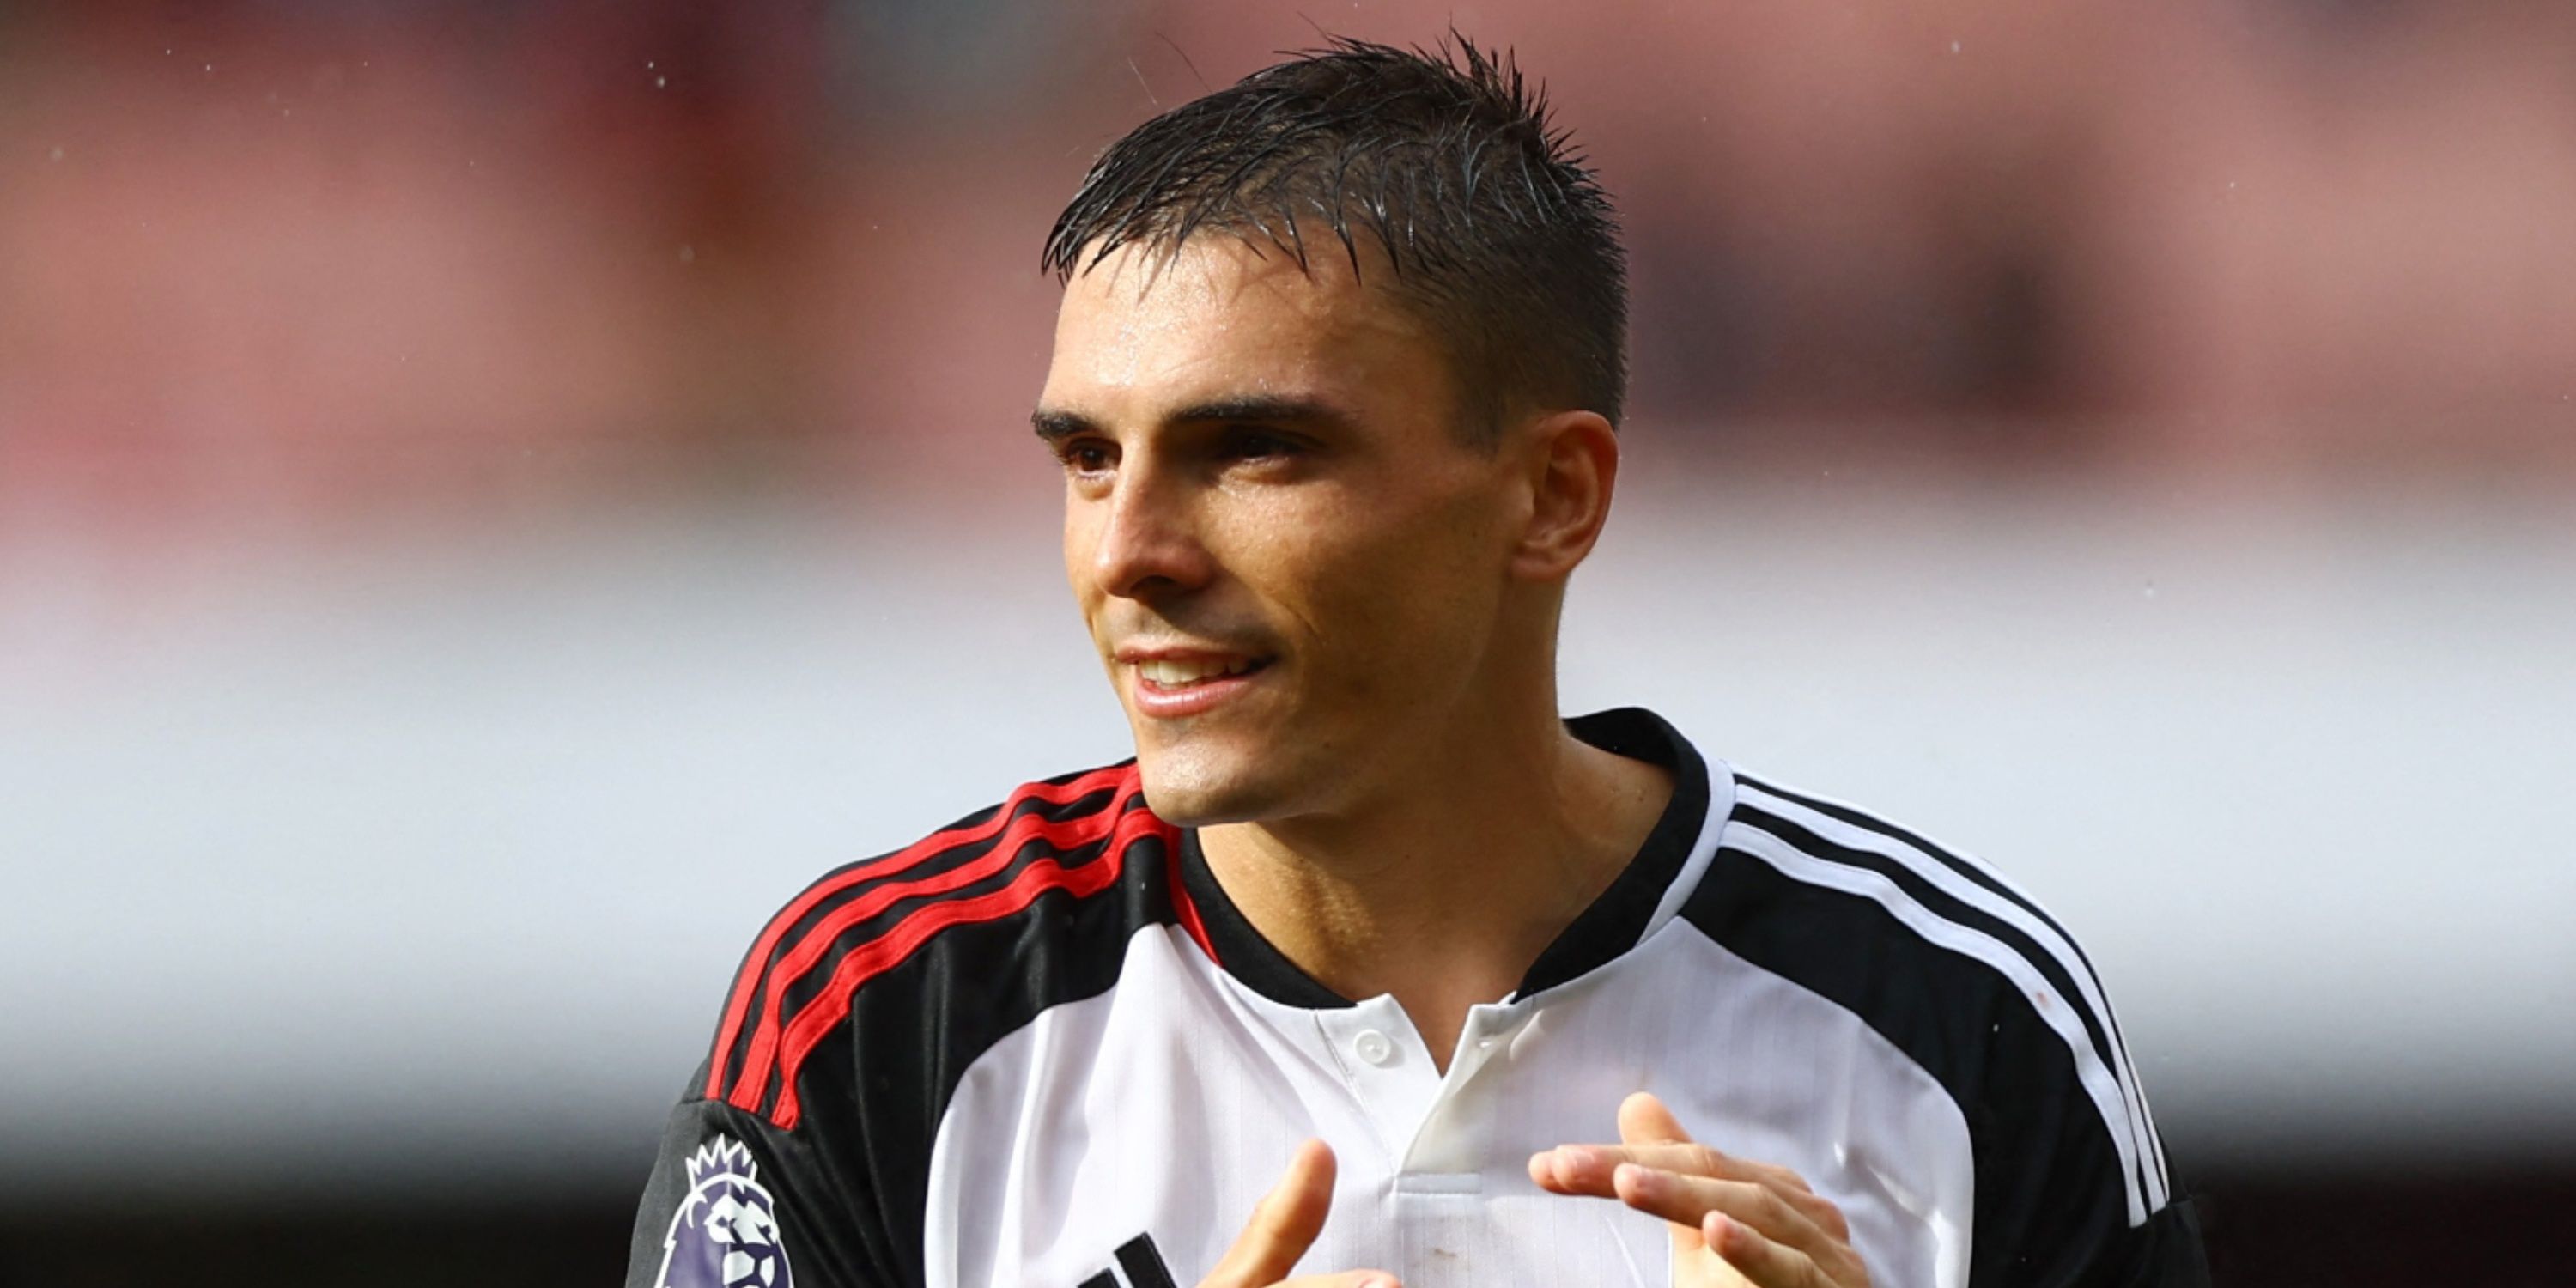 Fulham defensive midfielder Joao Palhinha smiling on the pitch